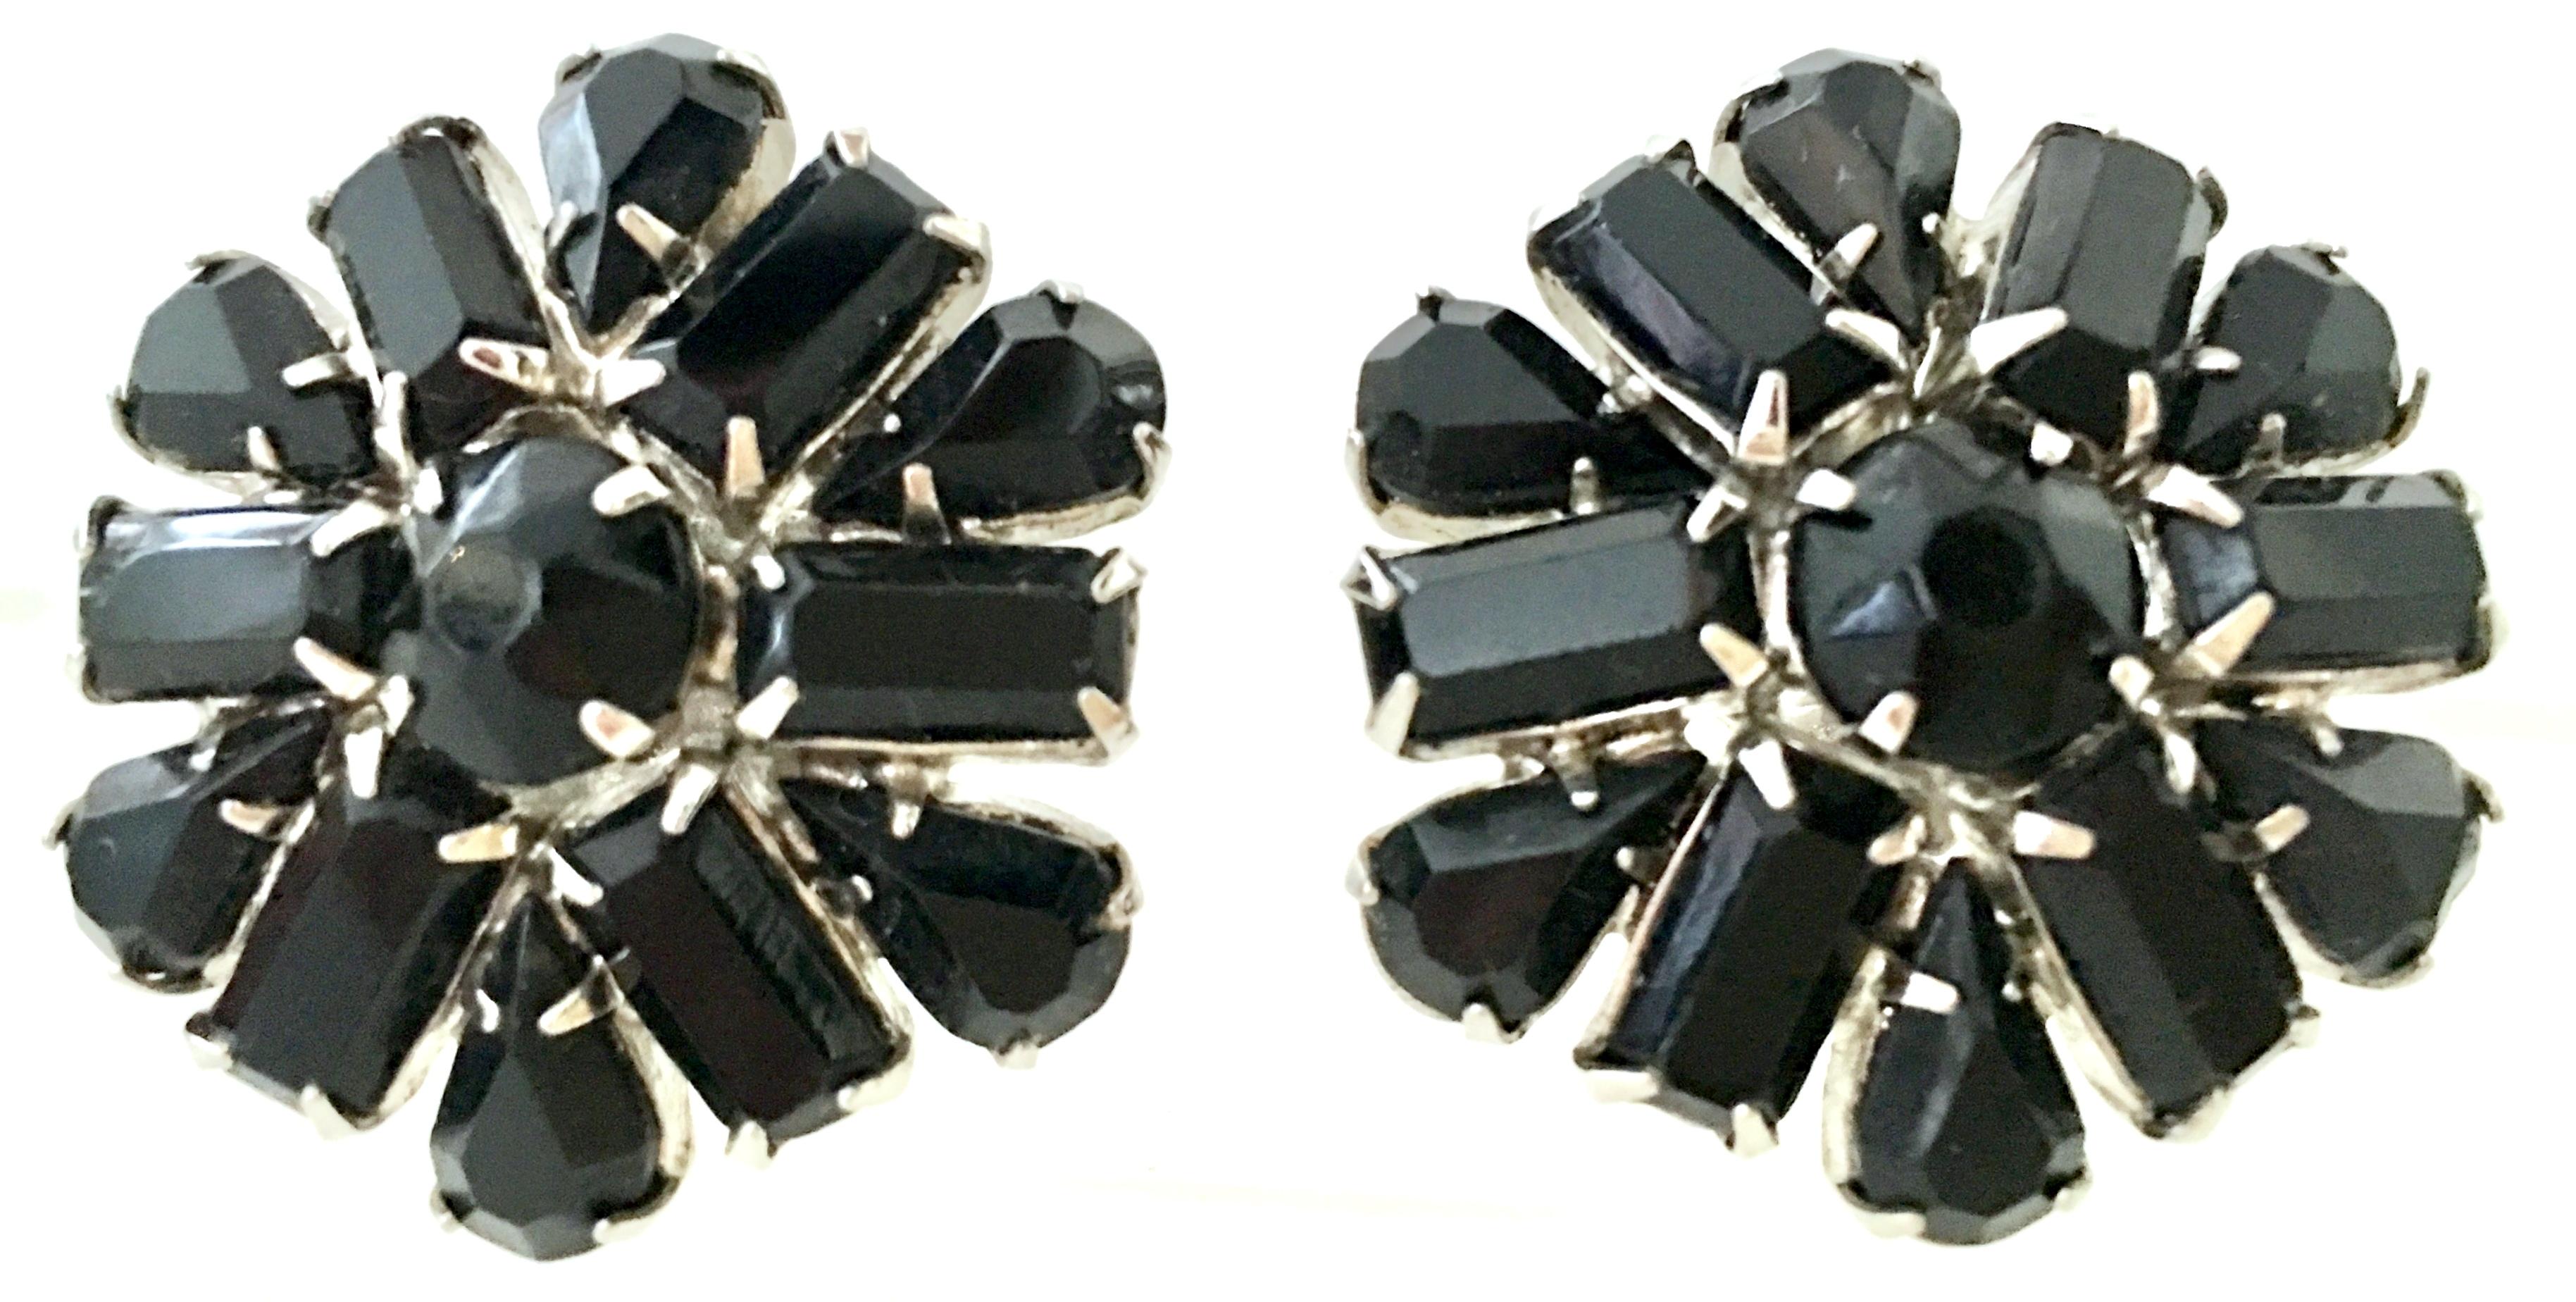 1960'S Silver Rhodium Plated Prong Set Black Molded Faceted Glass Clip Style Earrings By, Weiss. Each earrings is signed on the underside, Weiss.